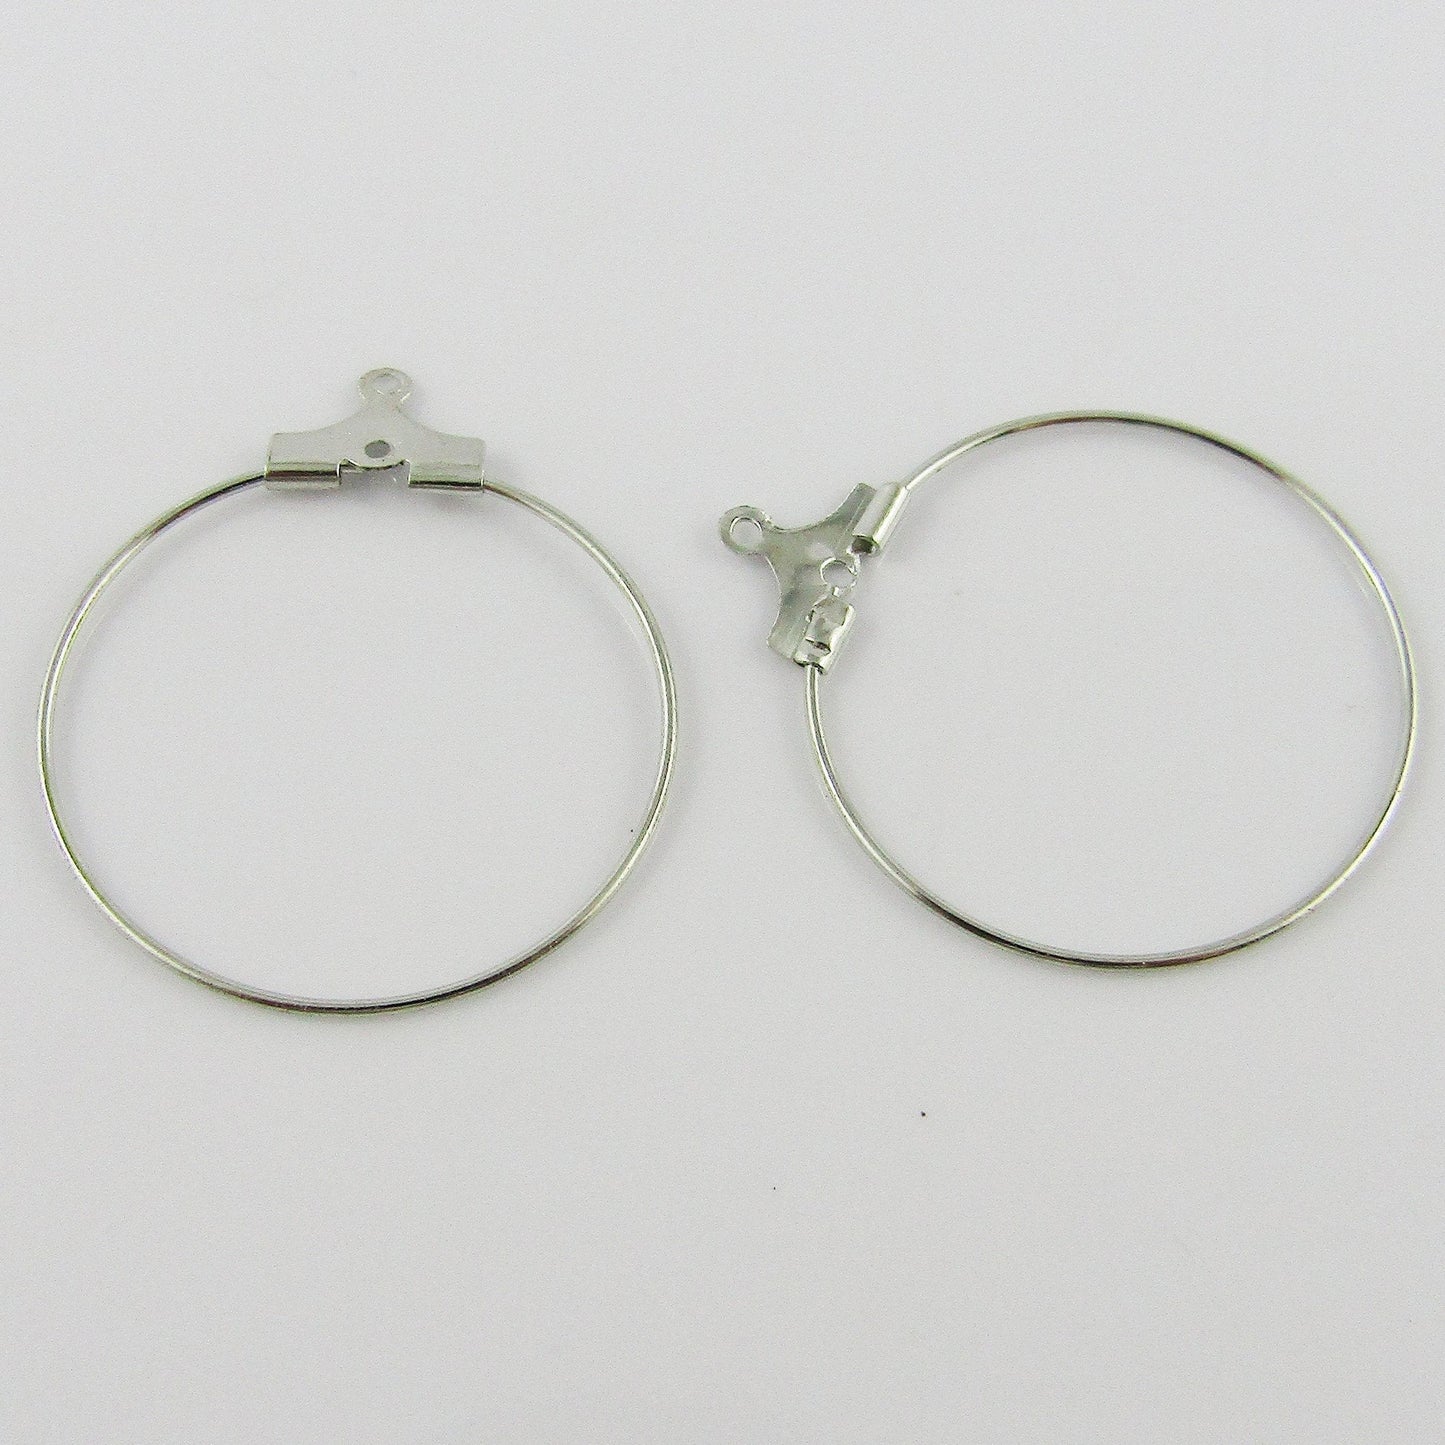 Bulk 10pcs Hoop Wire Earring Component Silver Select Size Opens to Add Beads